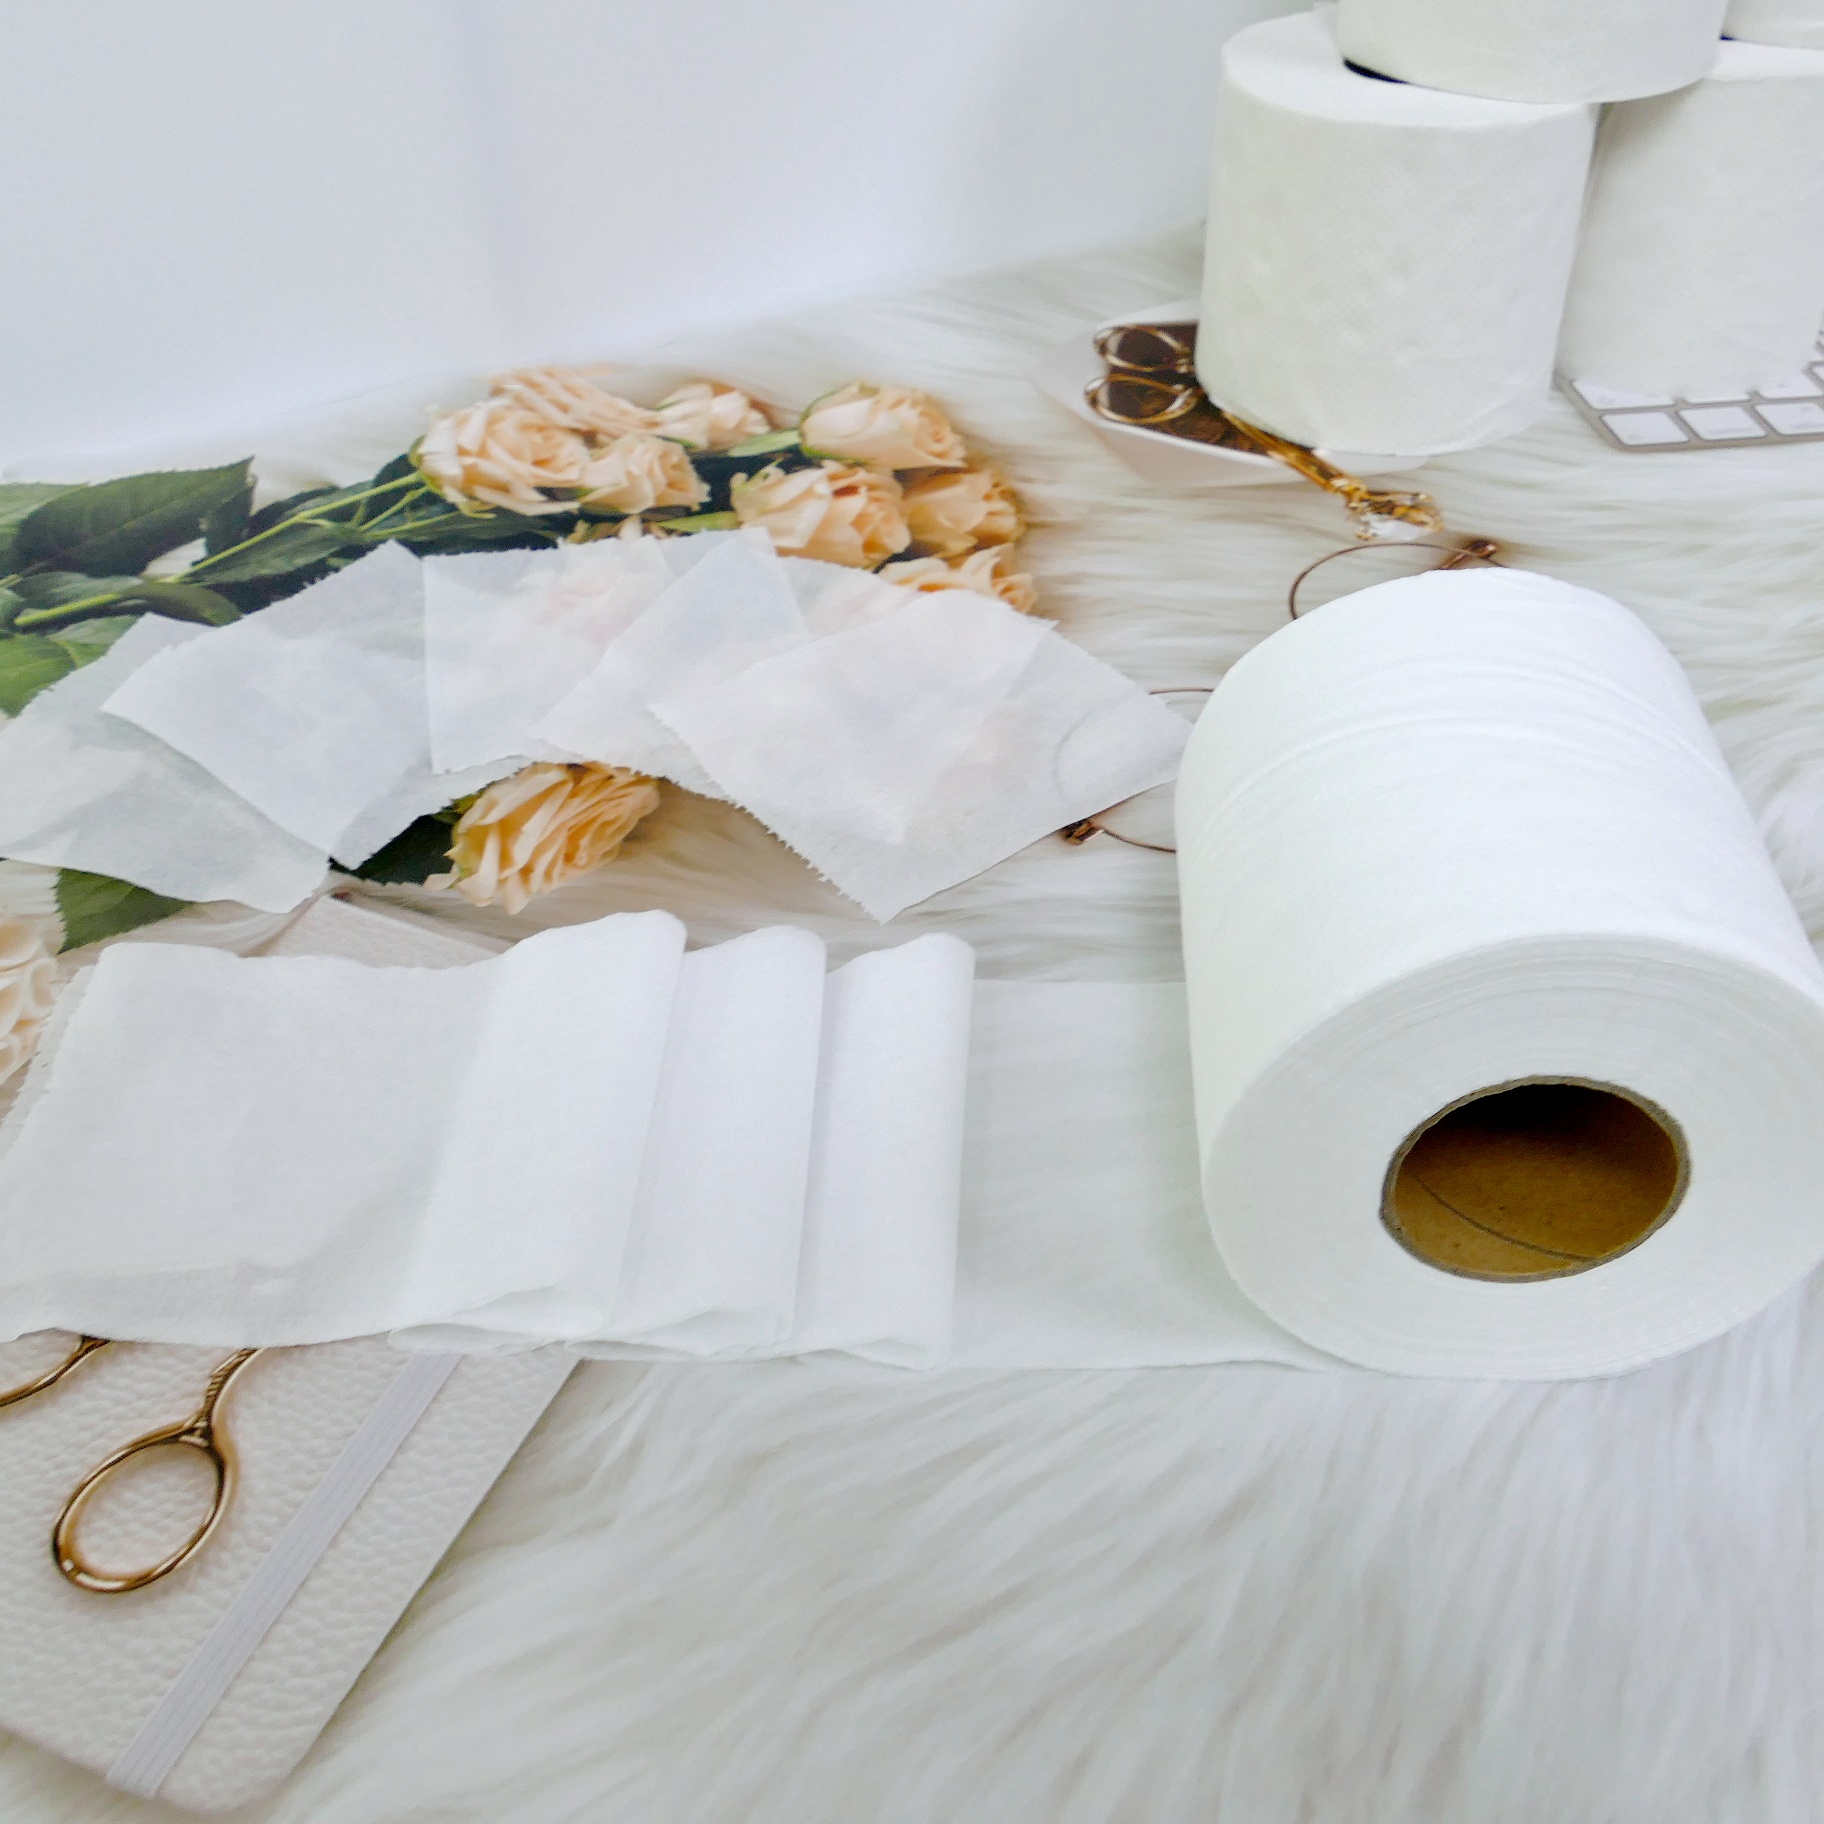 Recycle-145g 3ply Toilet Paper Roll No Fluorescents Paper Tissue with Full.. Embossing 24 Pcs/carton 